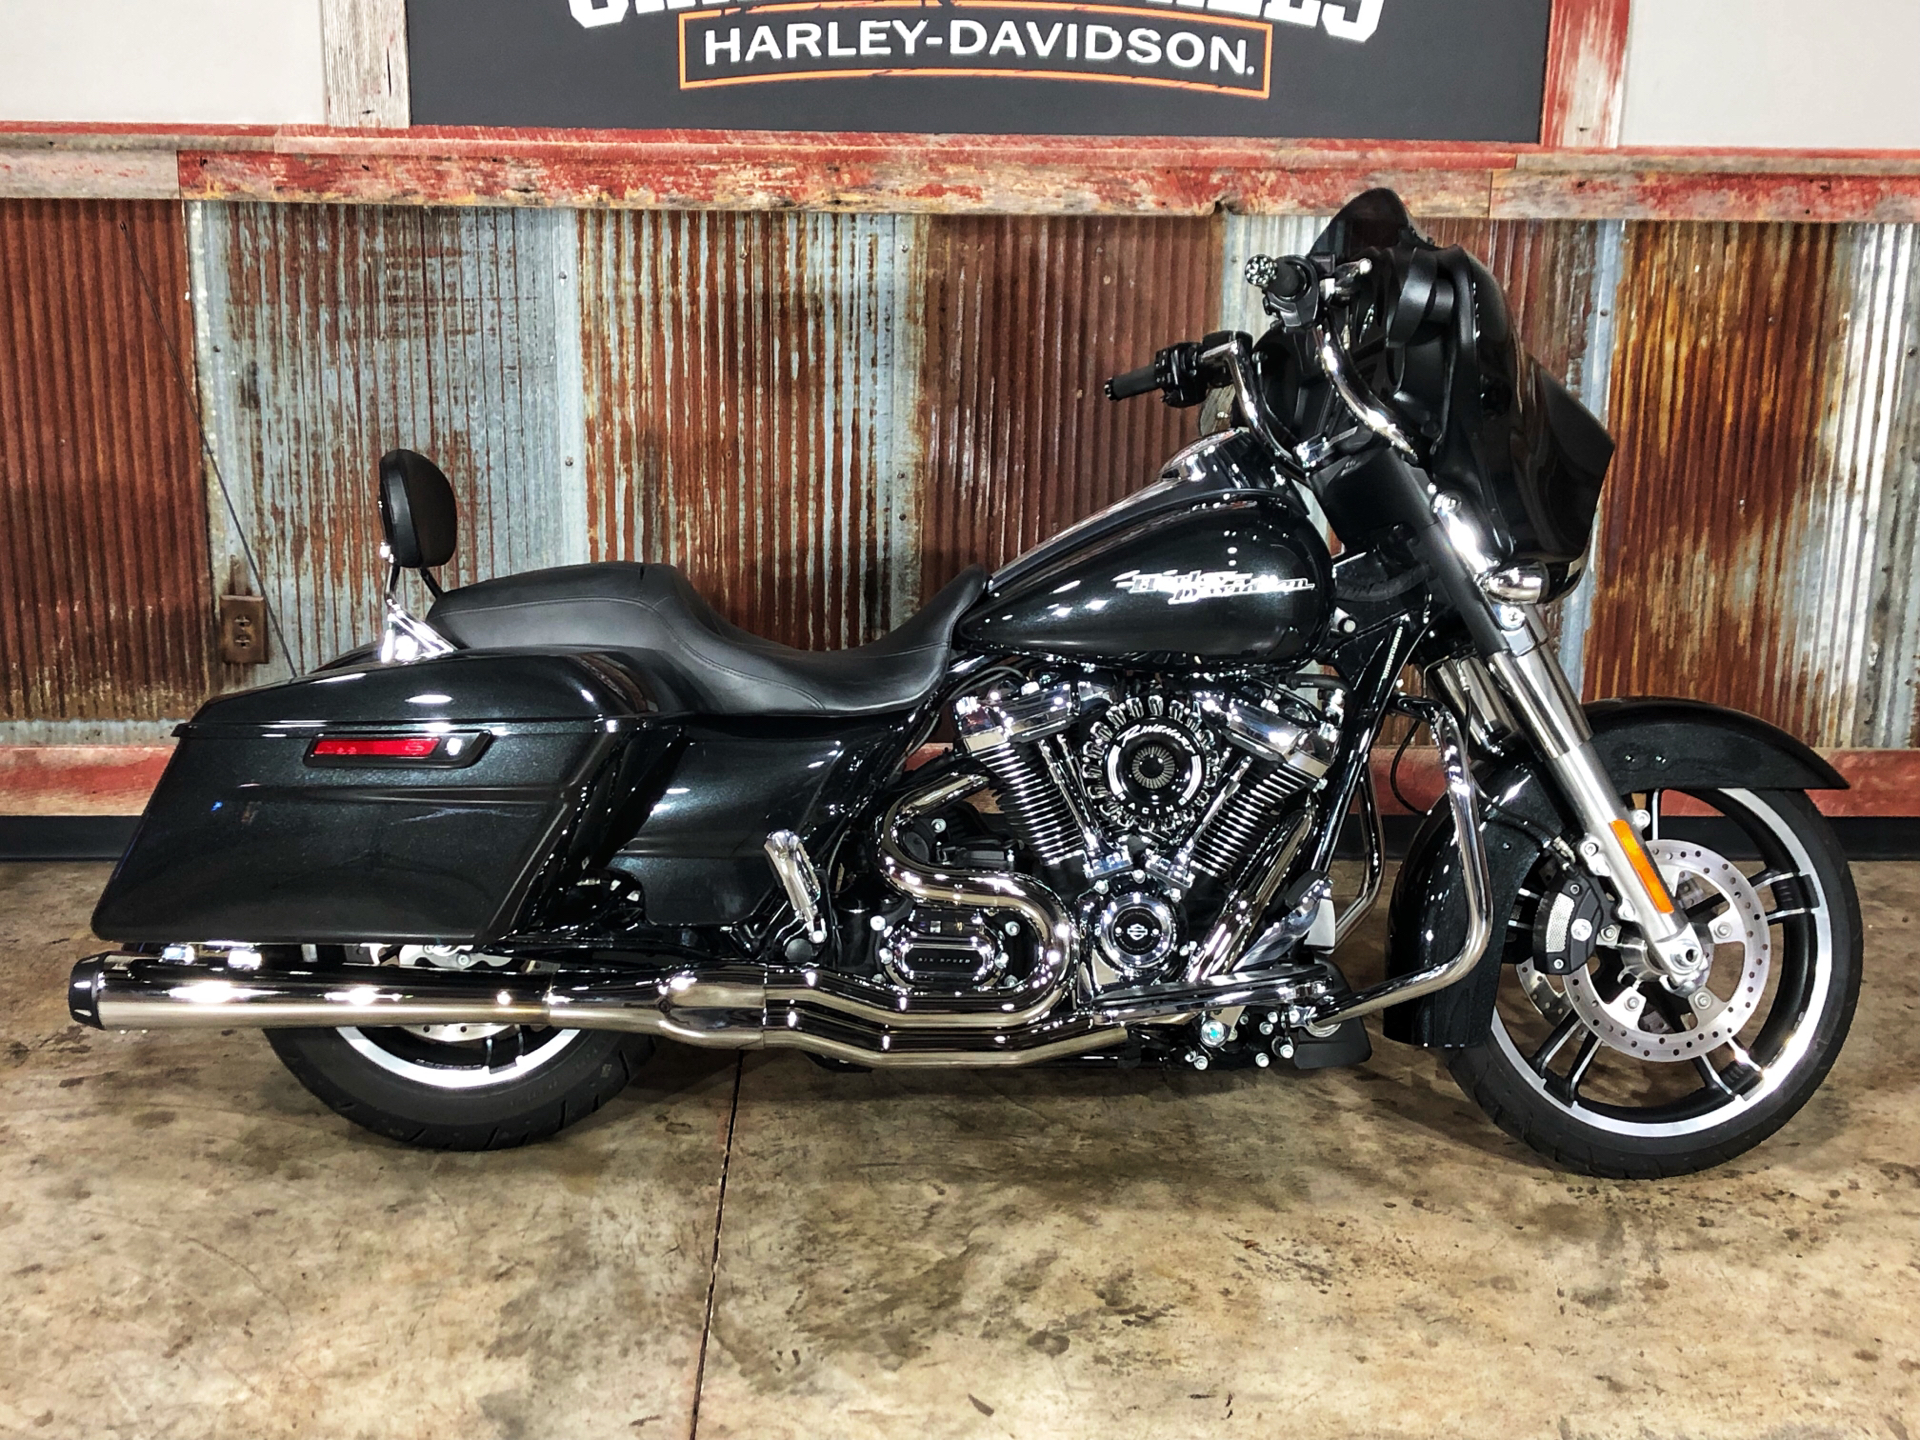 Used 2018 Harley Davidson Street Glide Black Tempest Motorcycles In Chippewa Falls Wi B0585